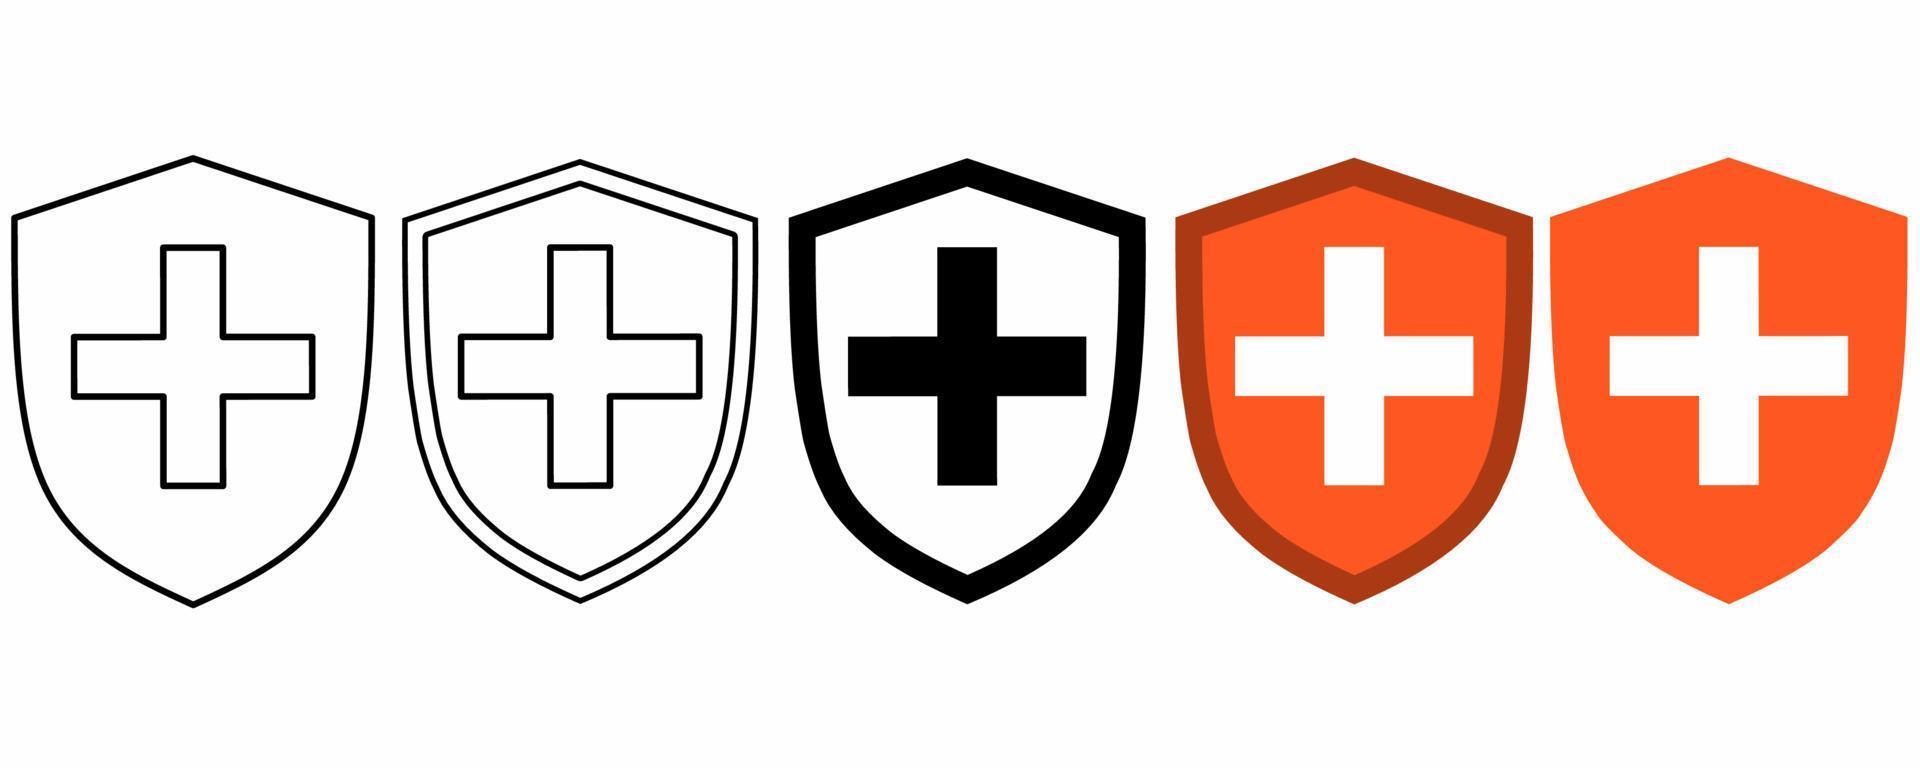 outline silhouette Medical shield with cross icon set isolated on white background vector